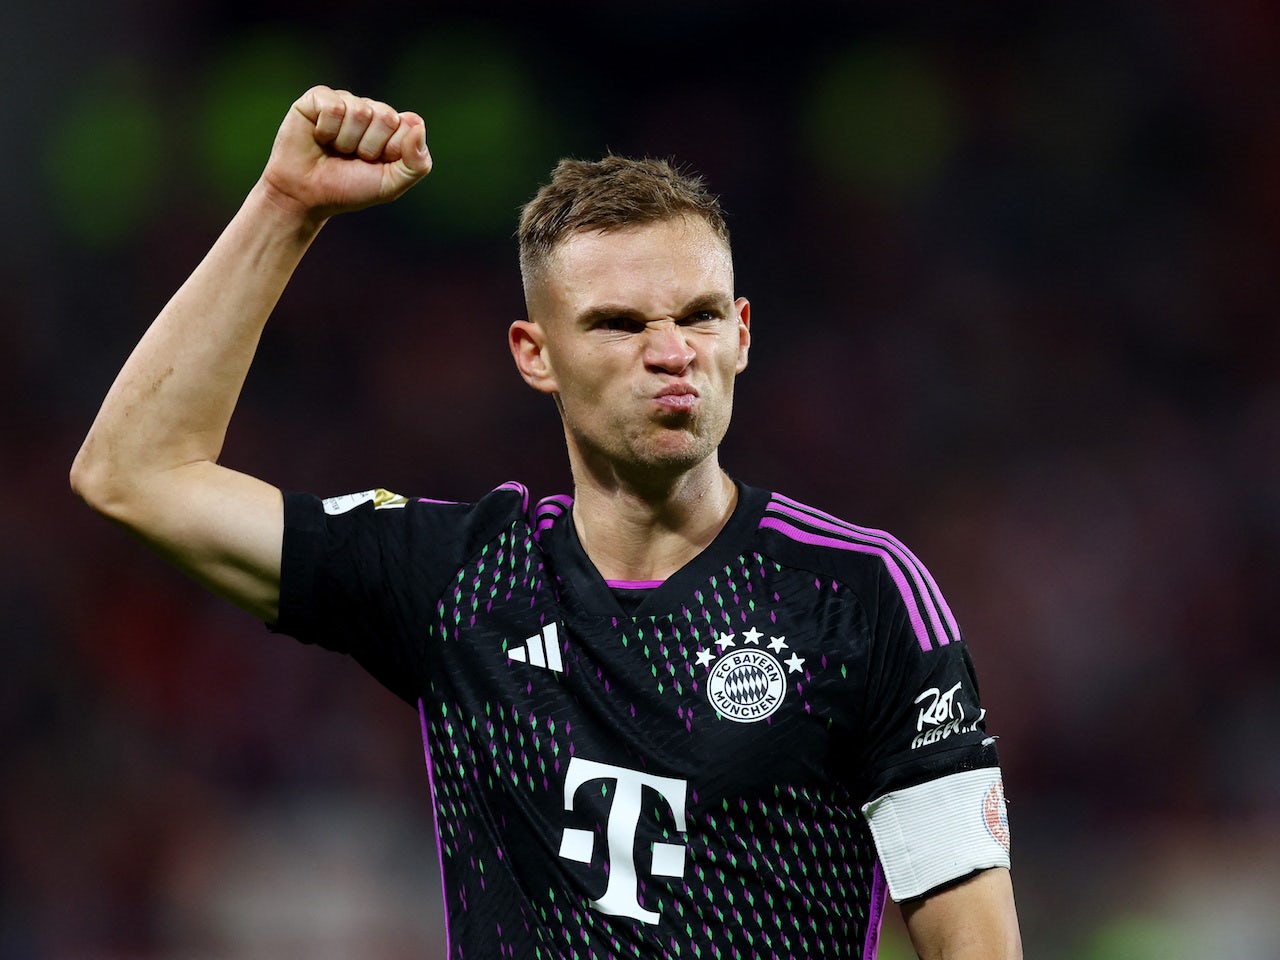 Manchester United, Manchester City-linked Joshua Kimmich 'wants Premier League move'